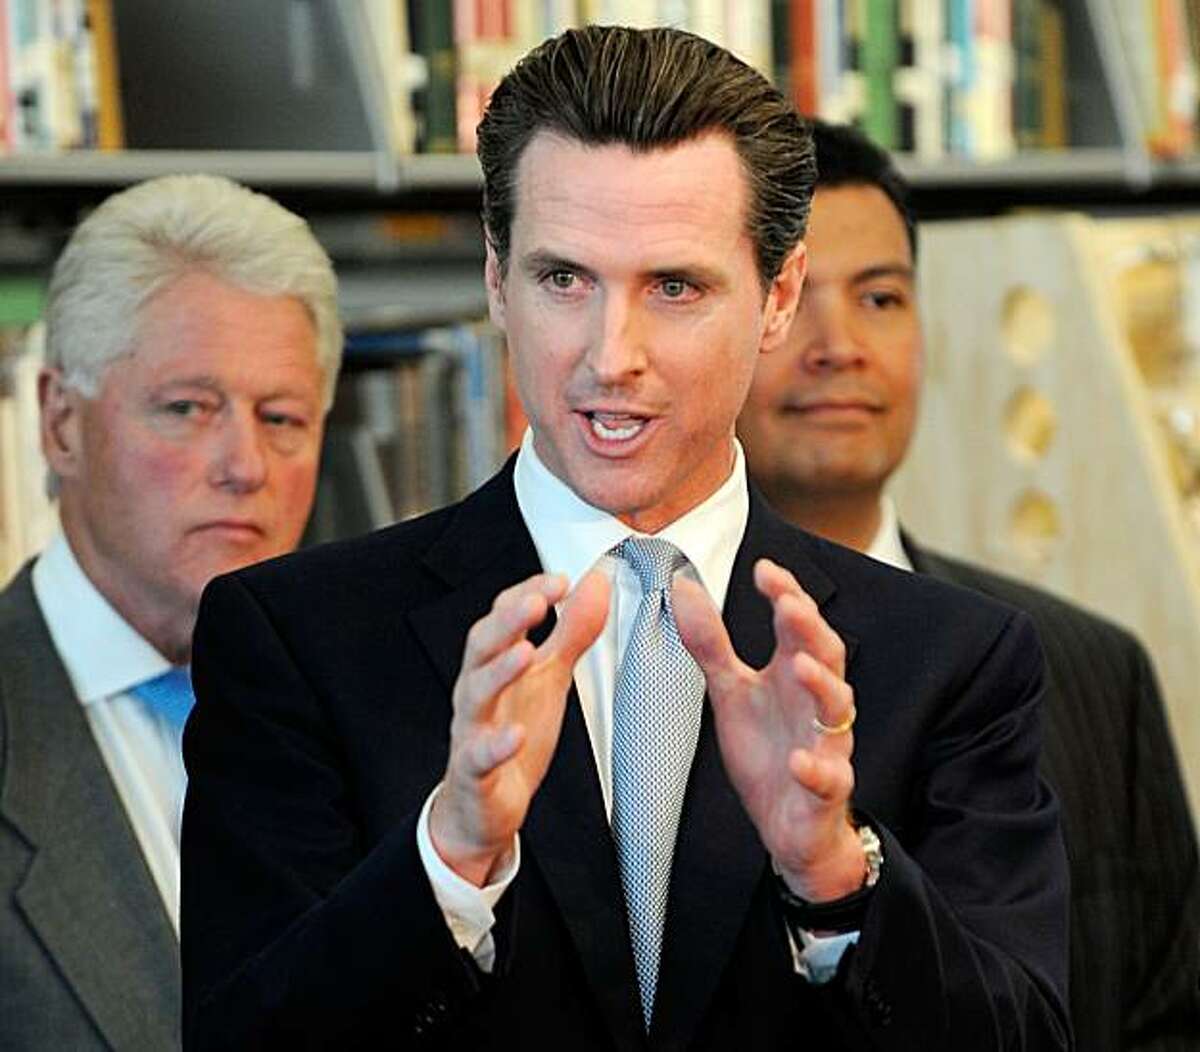 LOS ANGELES, CA - OCTOBER 05: California gubernatorial candidate San Francisco Mayor Gavin Newsom speaks as former President Bill Clinton looks on during a discussion with students and faculty of Los Angeles City College about education for green technology jobs on October 5, 2009 in Los Angeles, California. Clinton was in Los Angeles to help raise funds for Newsom's campaign for California governor. (Photo by Kevork Djansezian/Getty Images)